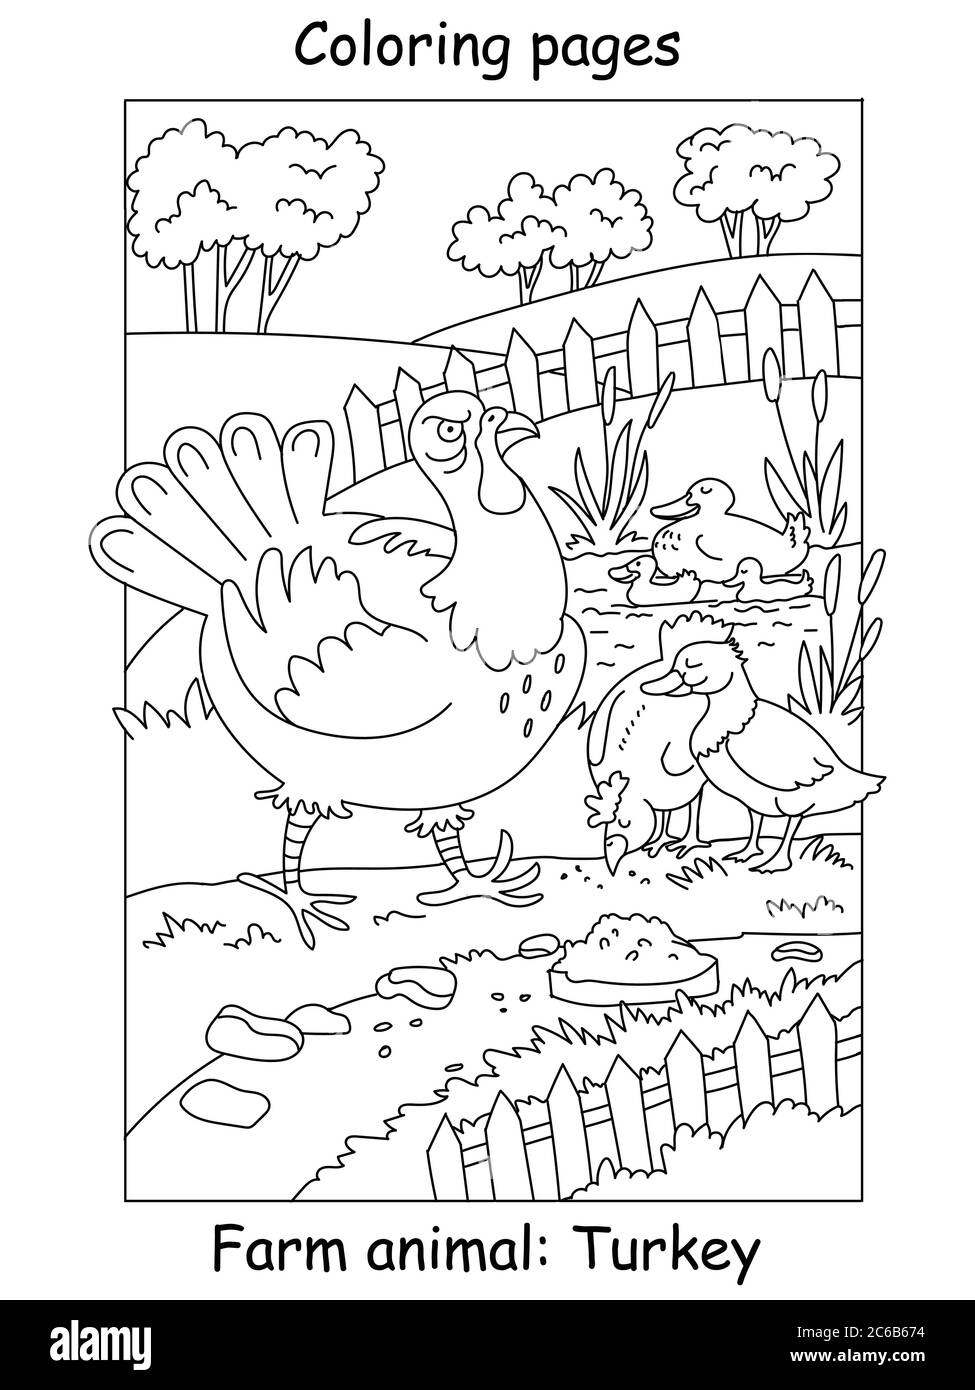 Vector coloring pages with funny angry turkey walking on the farm. Cartoon contour illustration isolated on white background. Stock illustration for c Stock Vector